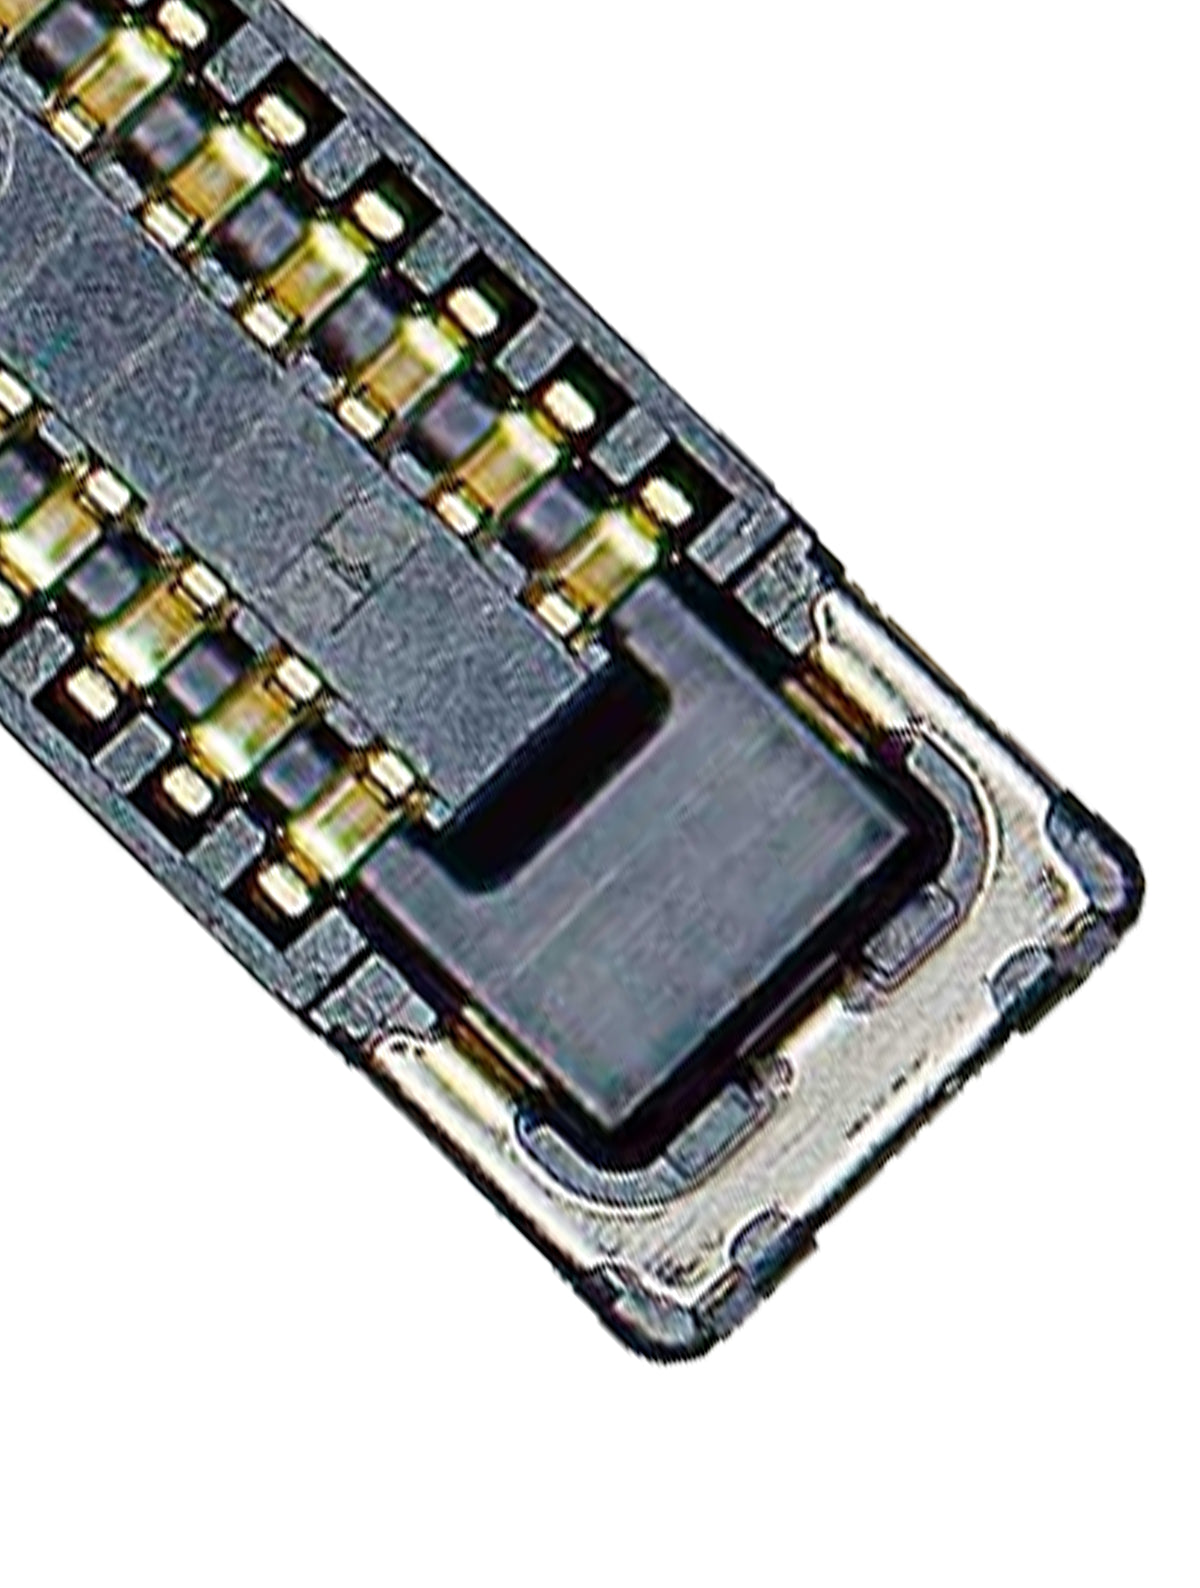 LCD FPC CONNECTOR COMPATIBLE WITH IPHONE 11 PRO / 11 PRO MAX (J8000: 36 PIN)